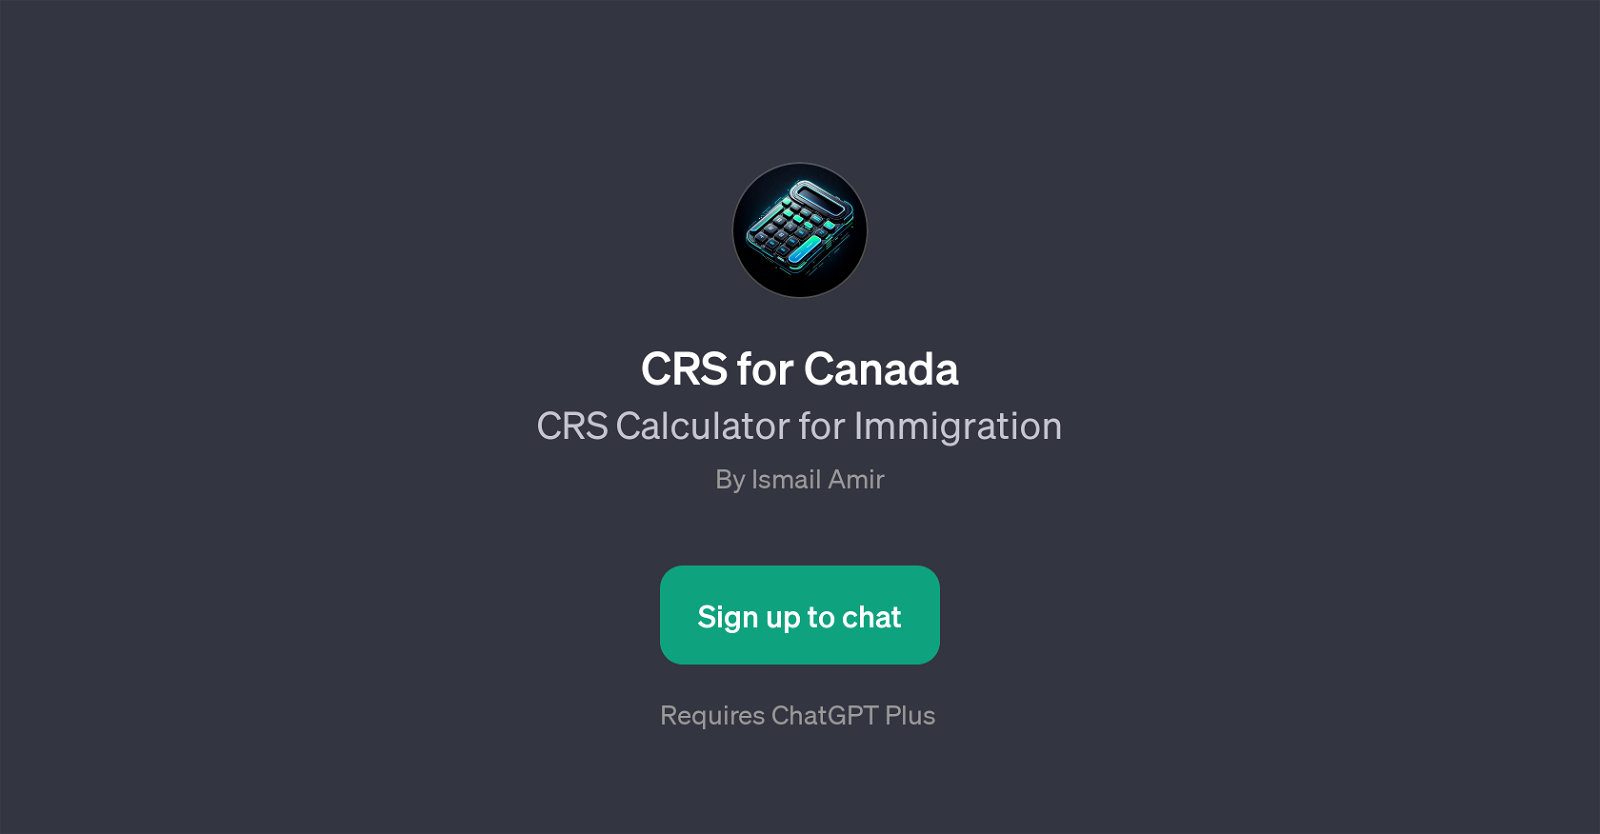 CRS for Canada website